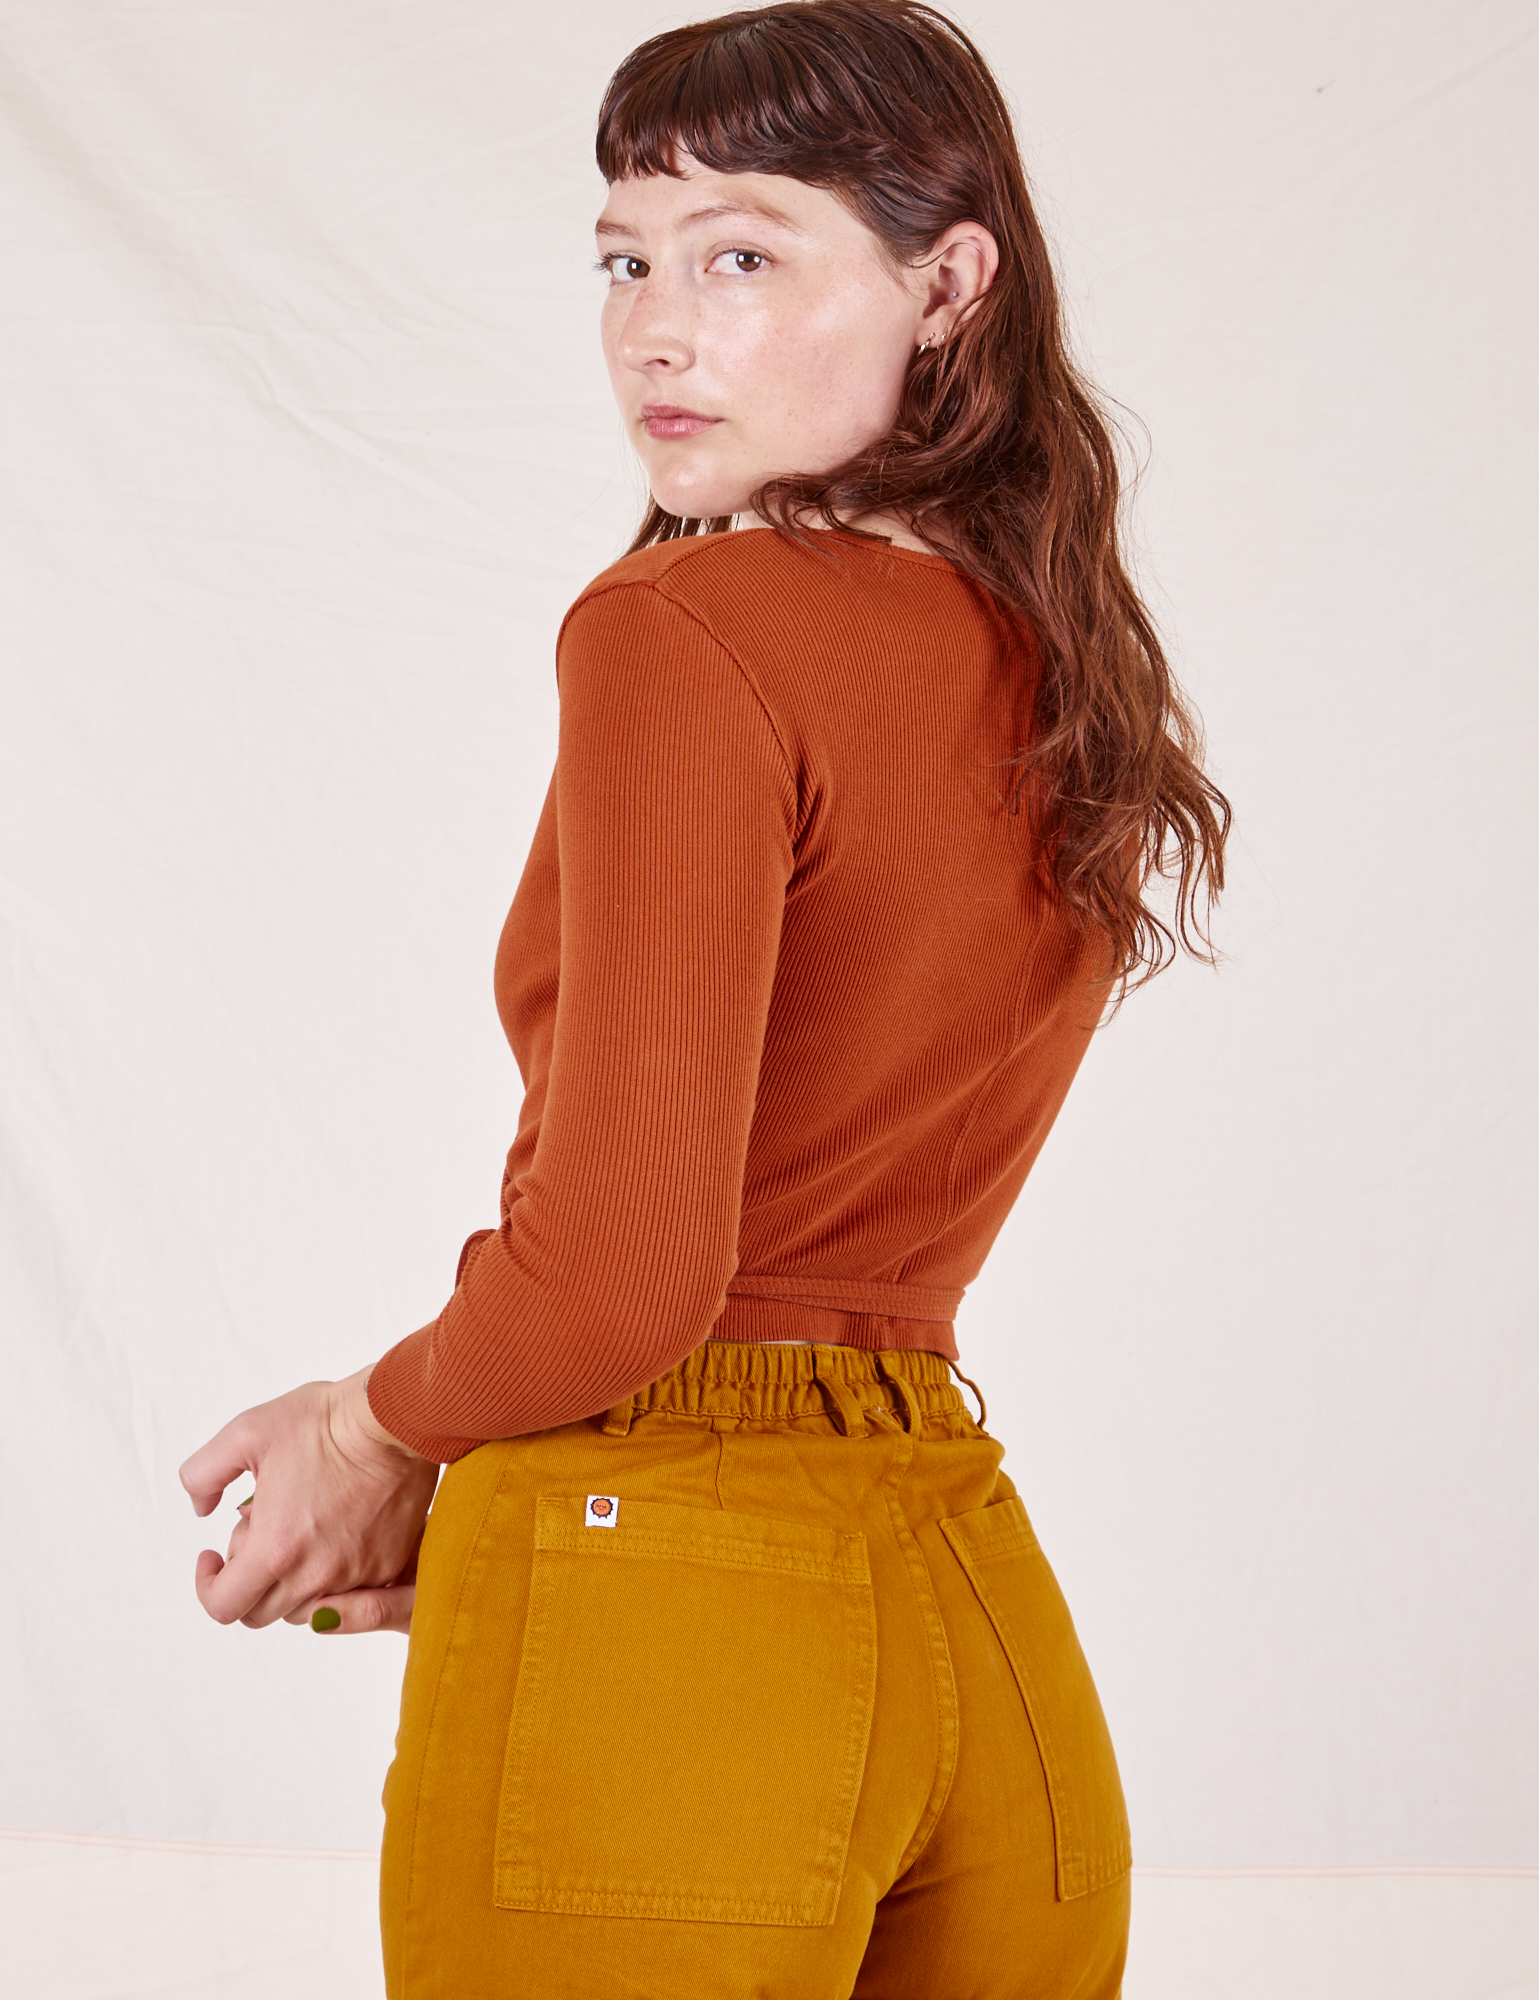 Wrap Top in Burnt Terracotta back view on Alex